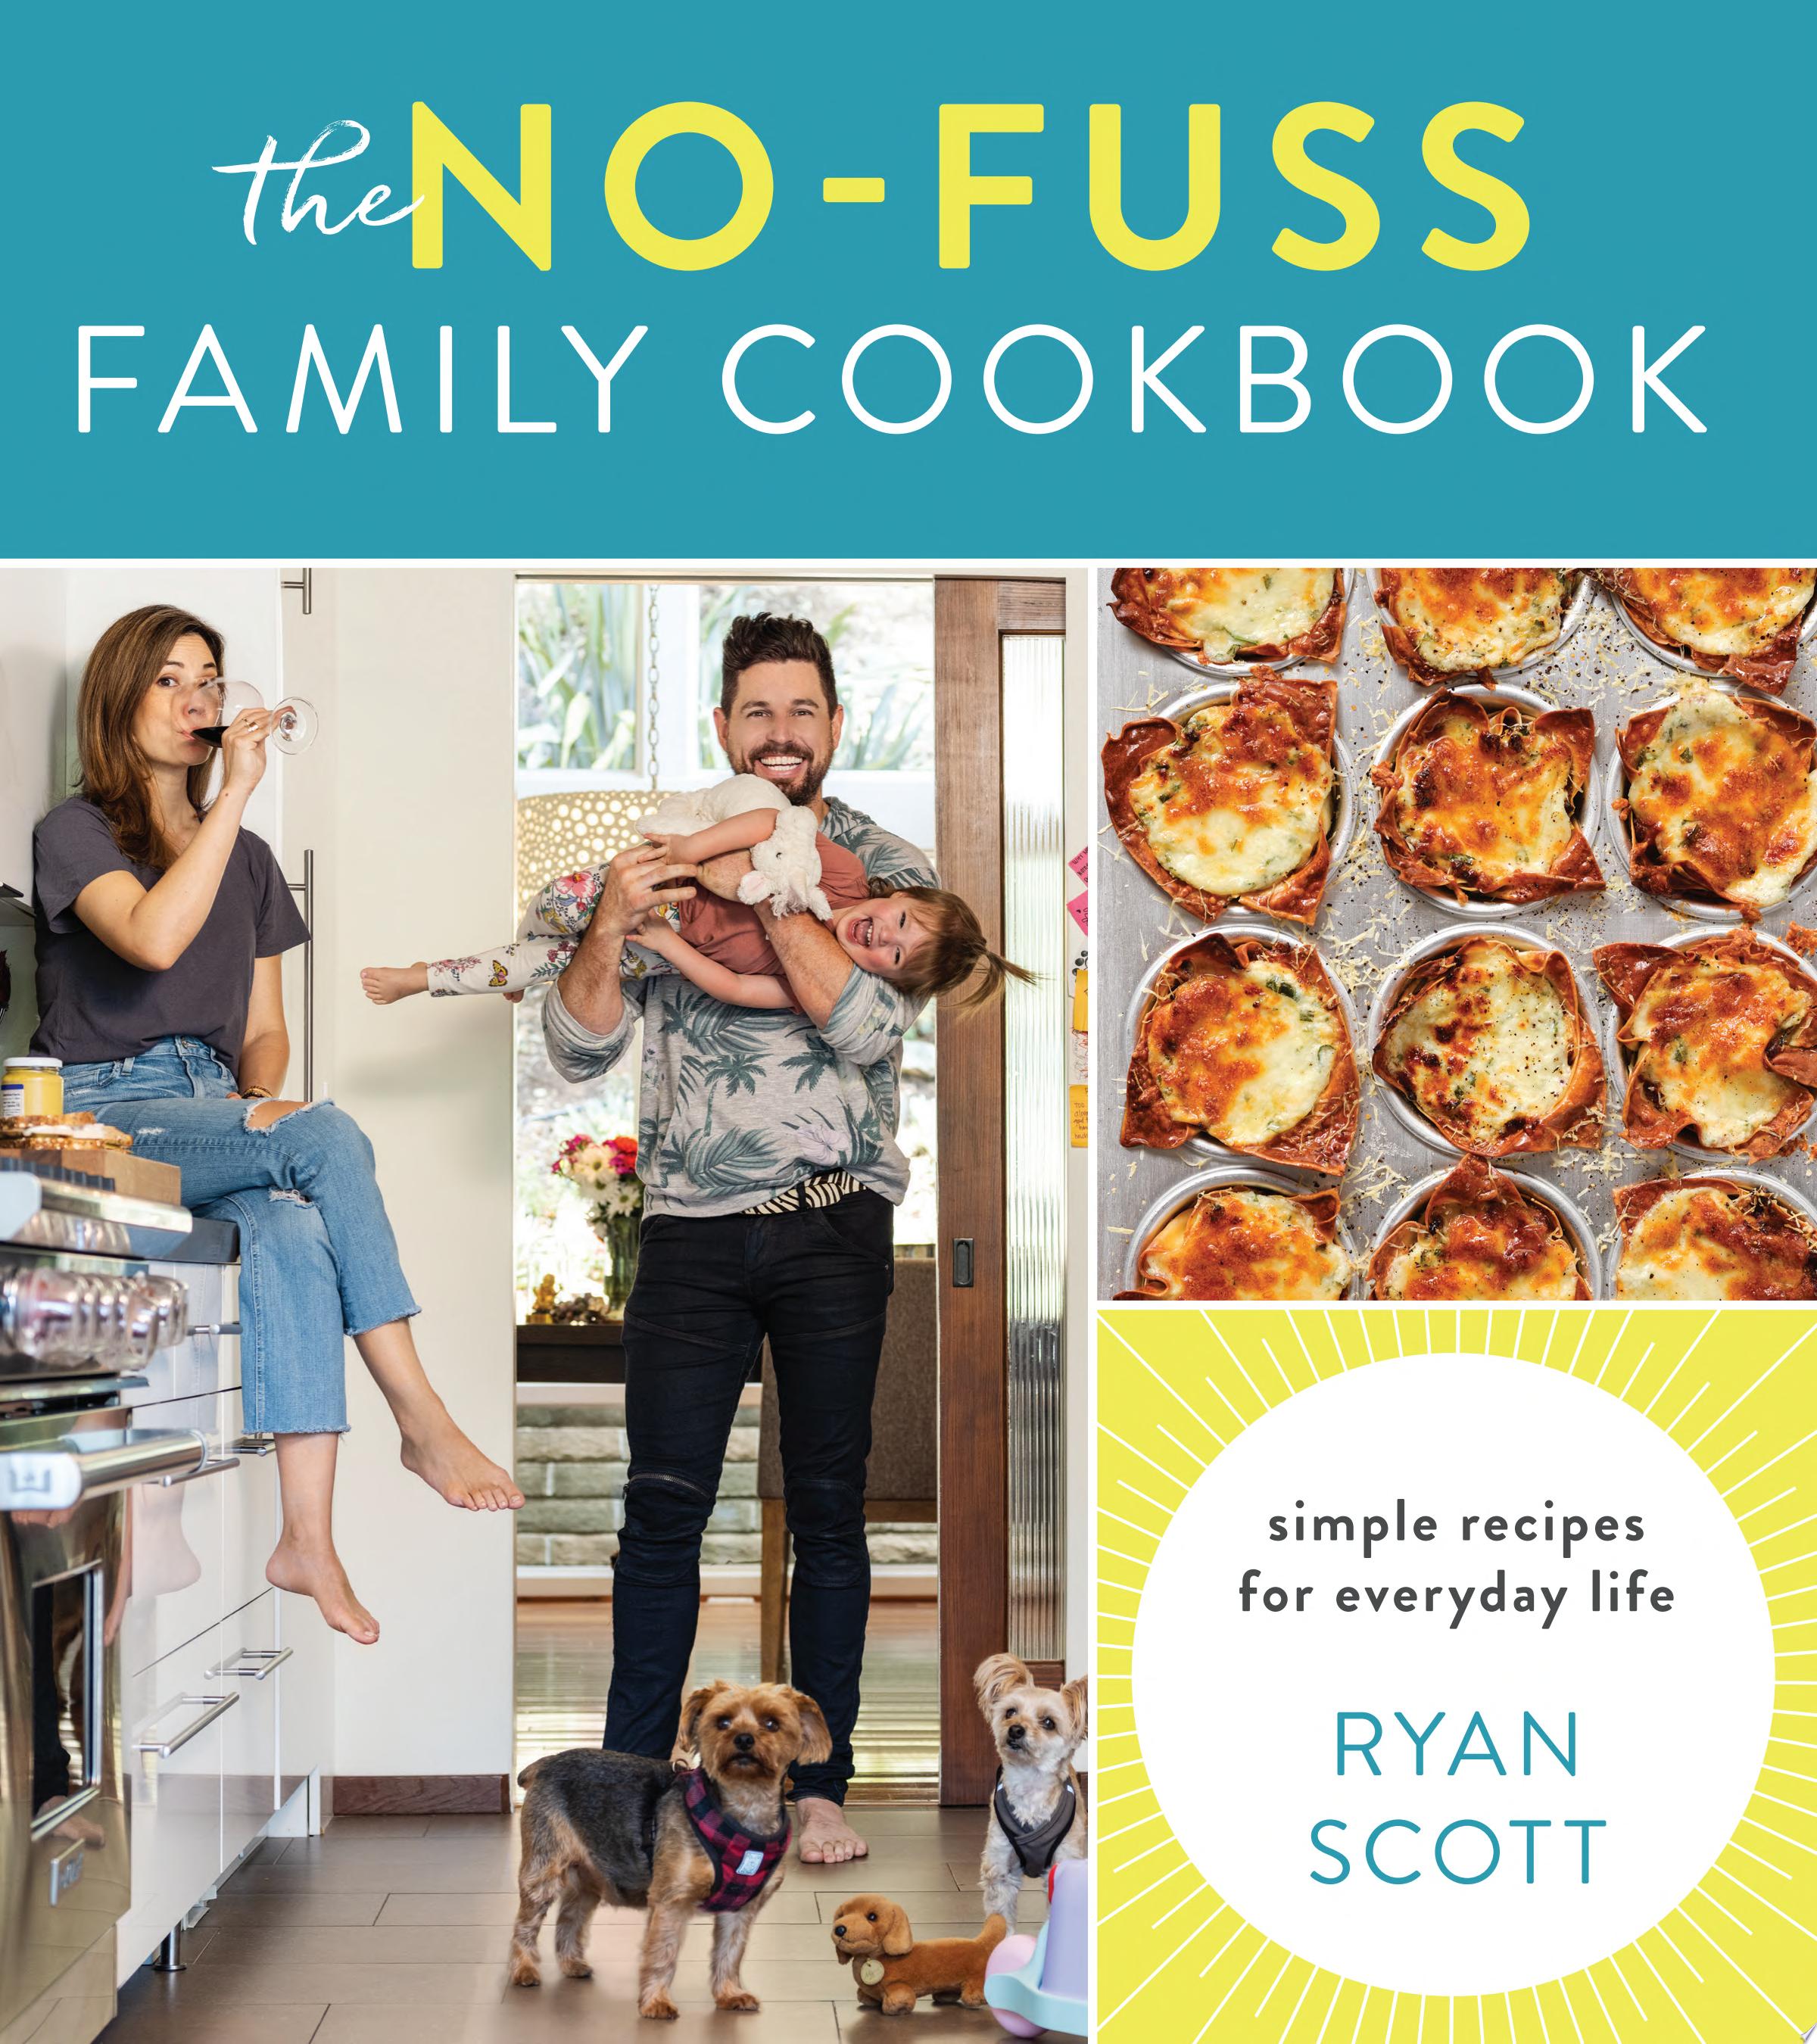 Image for "The No-Fuss Family Cookbook"